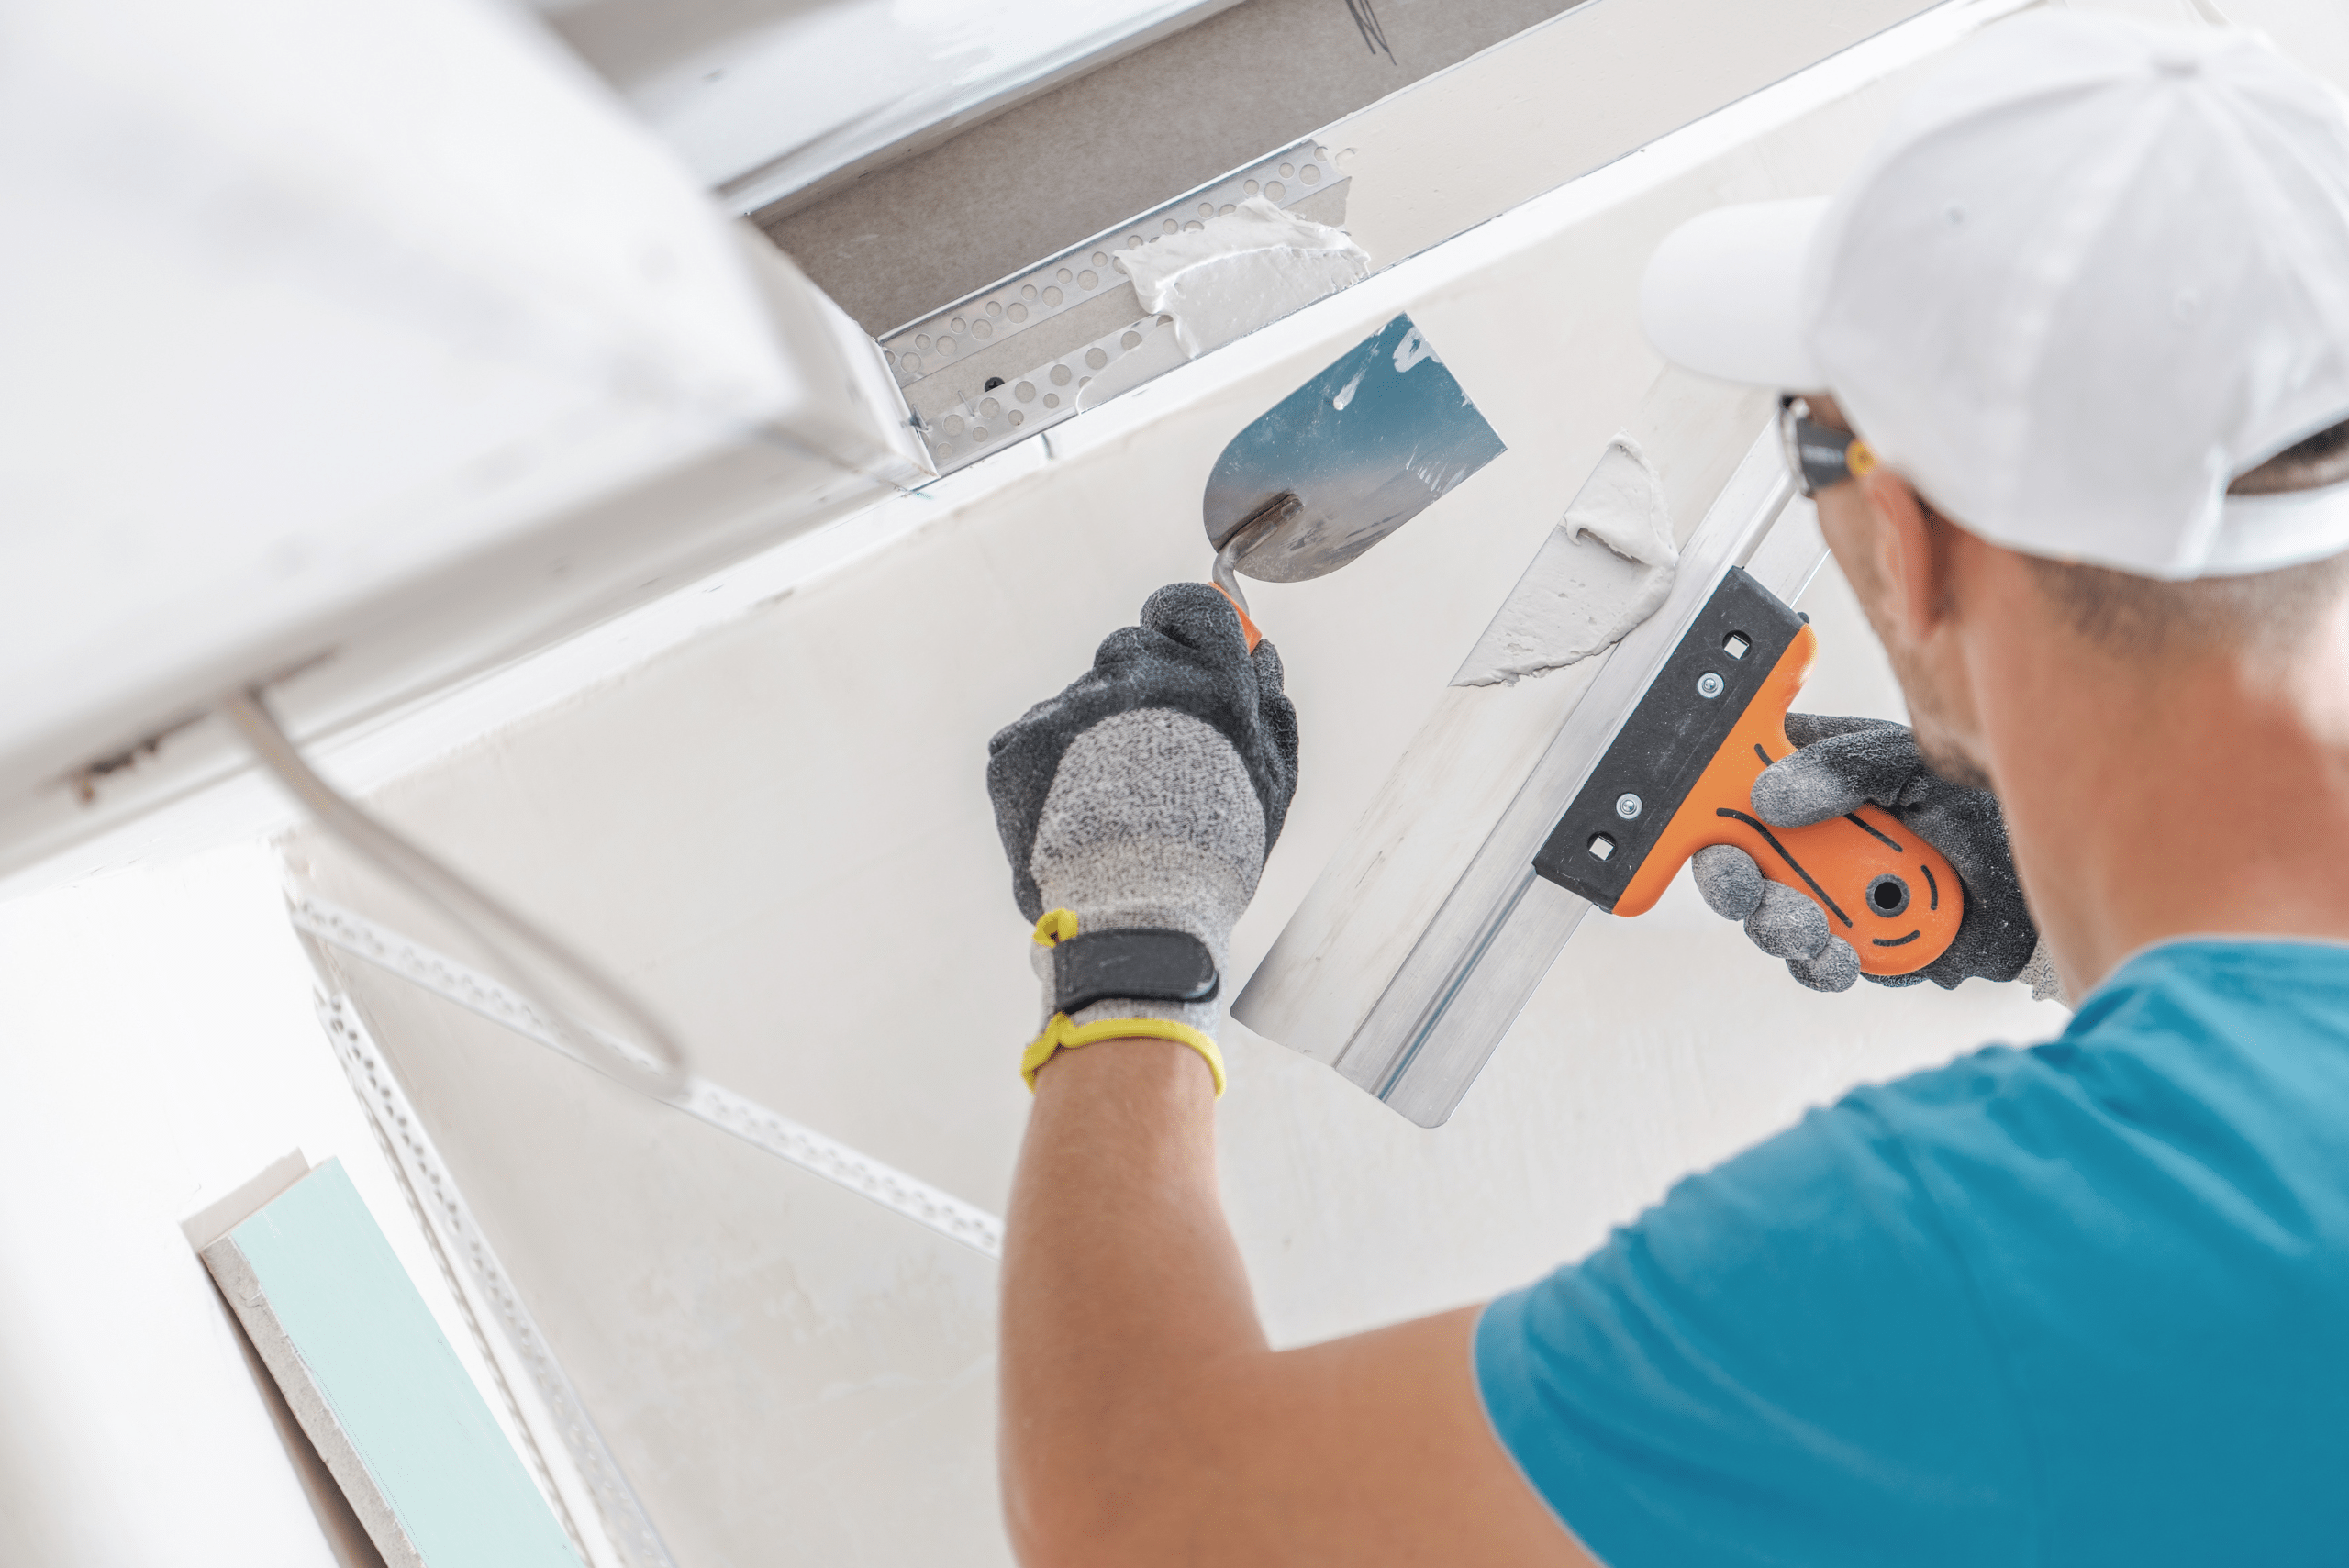 A worker using tools to spread mud onto hung drywall.